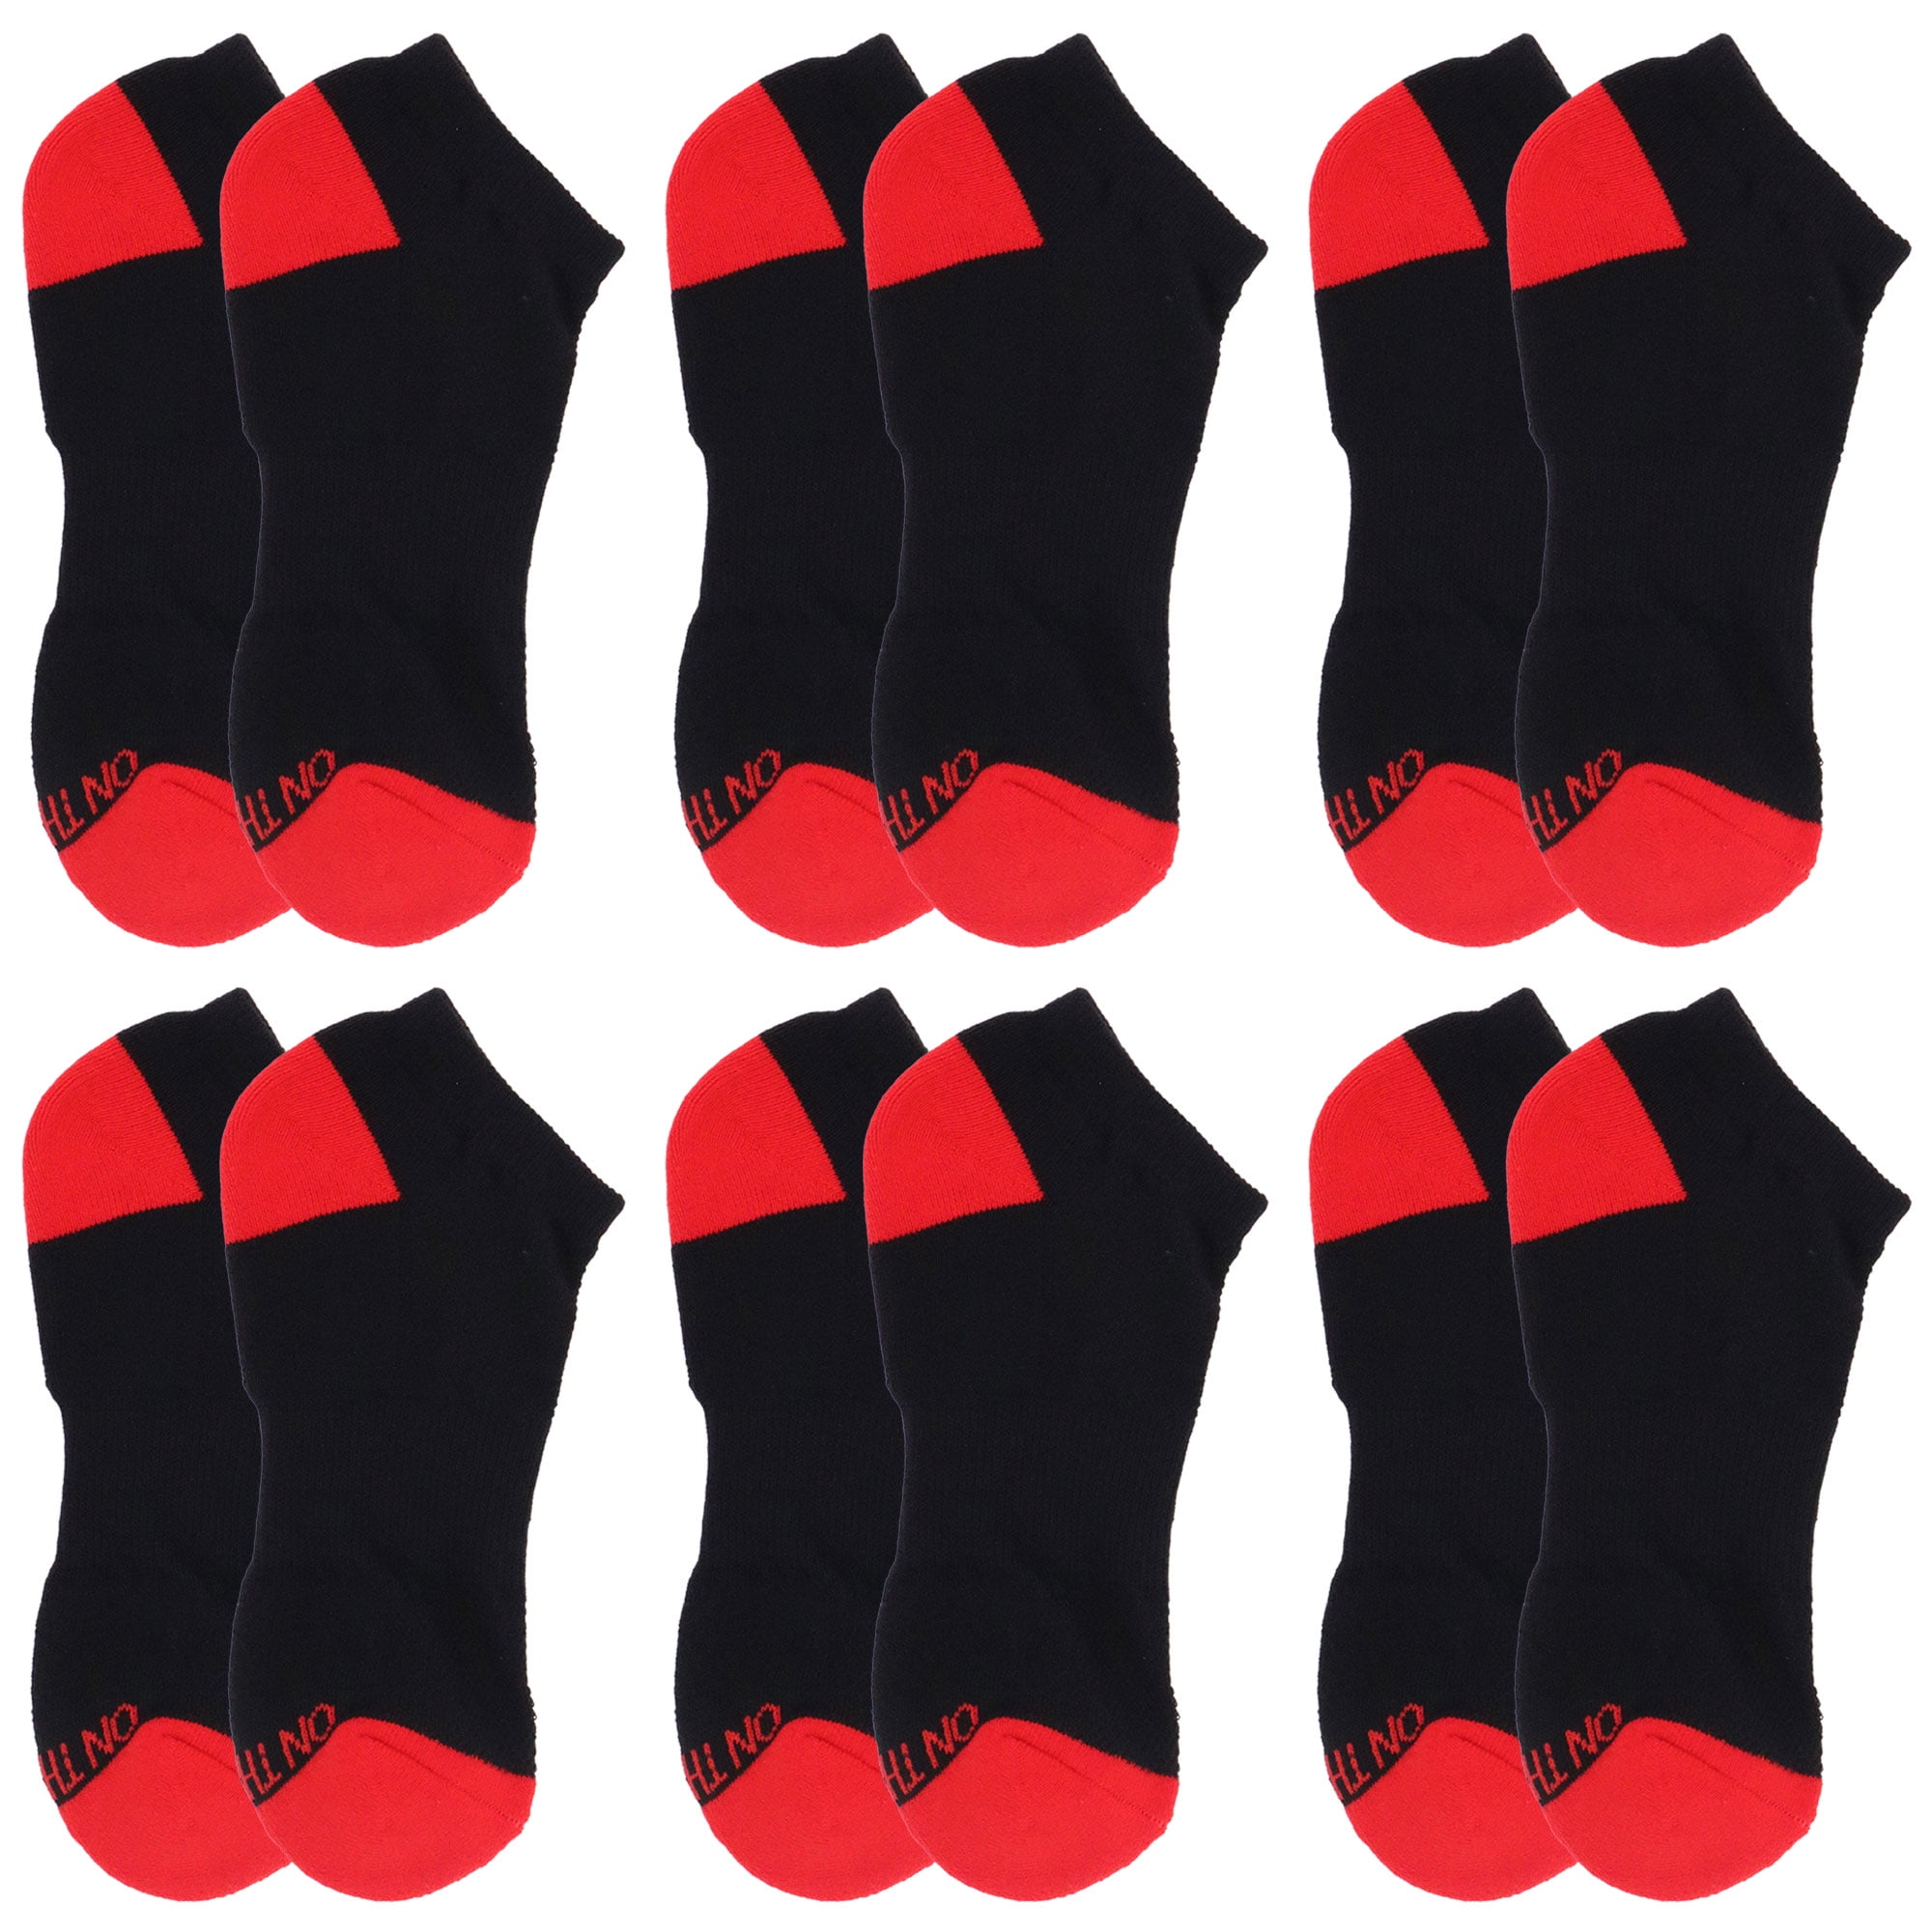 On the Go Women's Classic Cushion Fashion Low-Cut Socks, Red Heel and ...